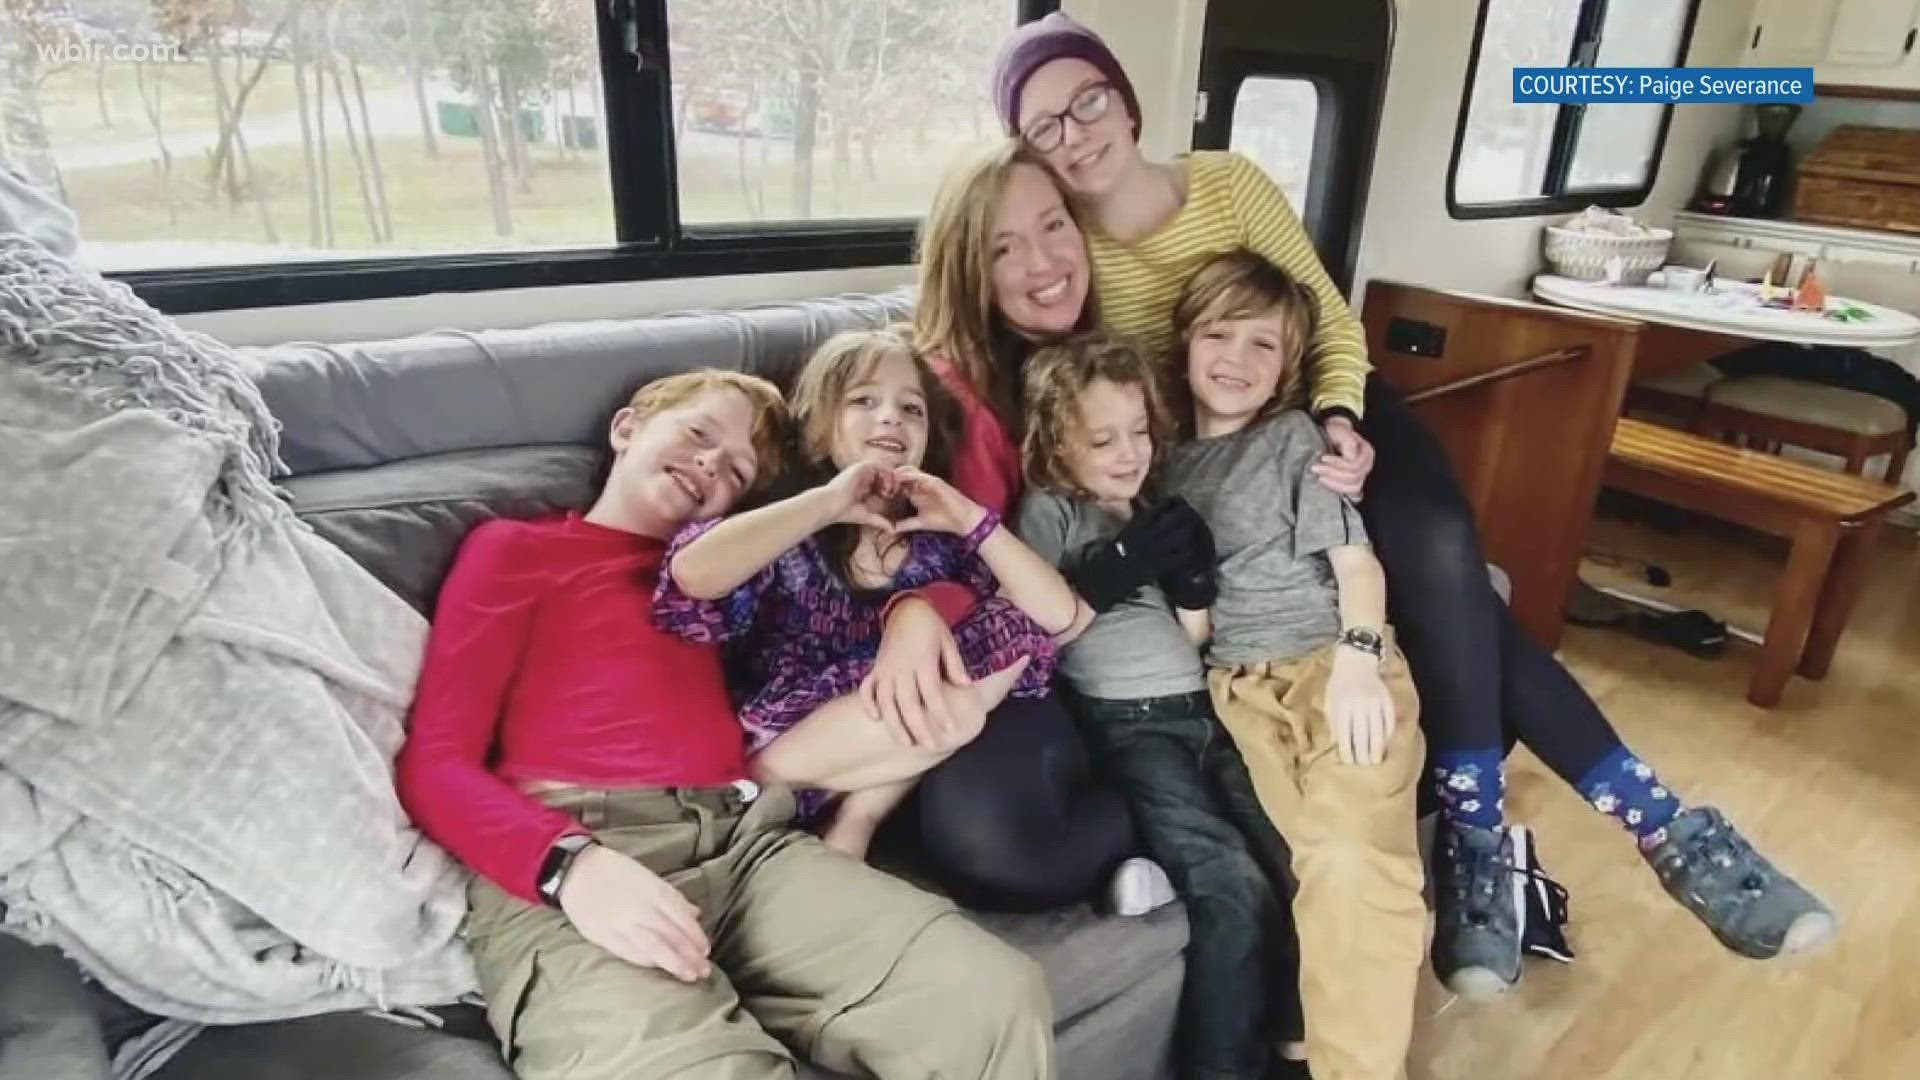 The Severance Family decided to follow a decades-long dream of living in an RV out west after COVID canceled school for their kids. After 9 months, they're now back.